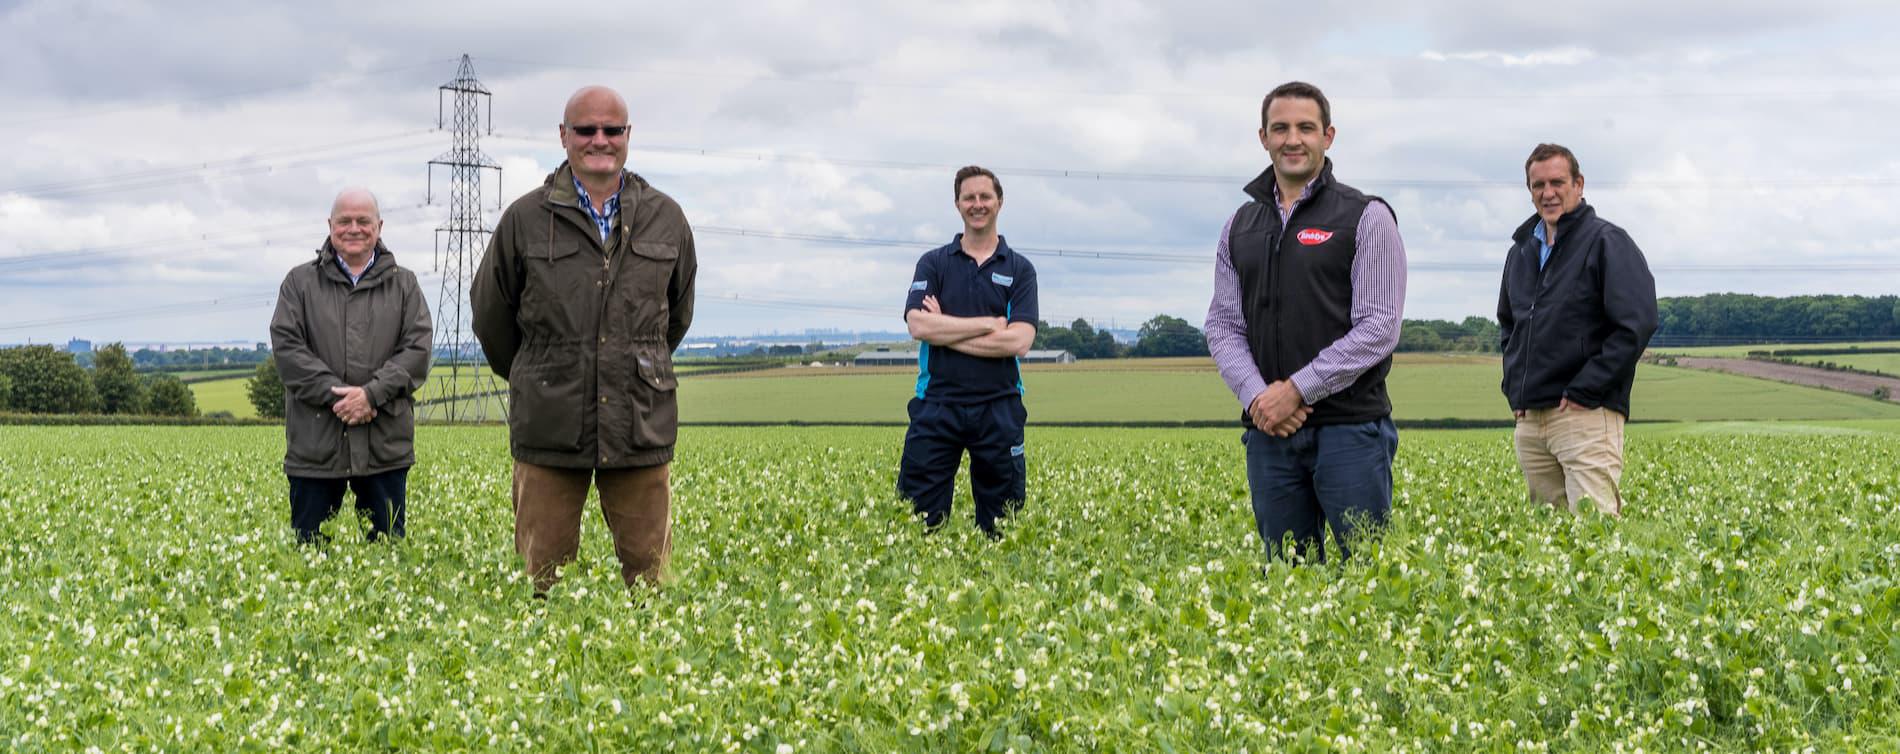 A landmark, farm-based project that could help return atmospheric CO2 to pre-industrial levels has been launched in East Yorkshire.